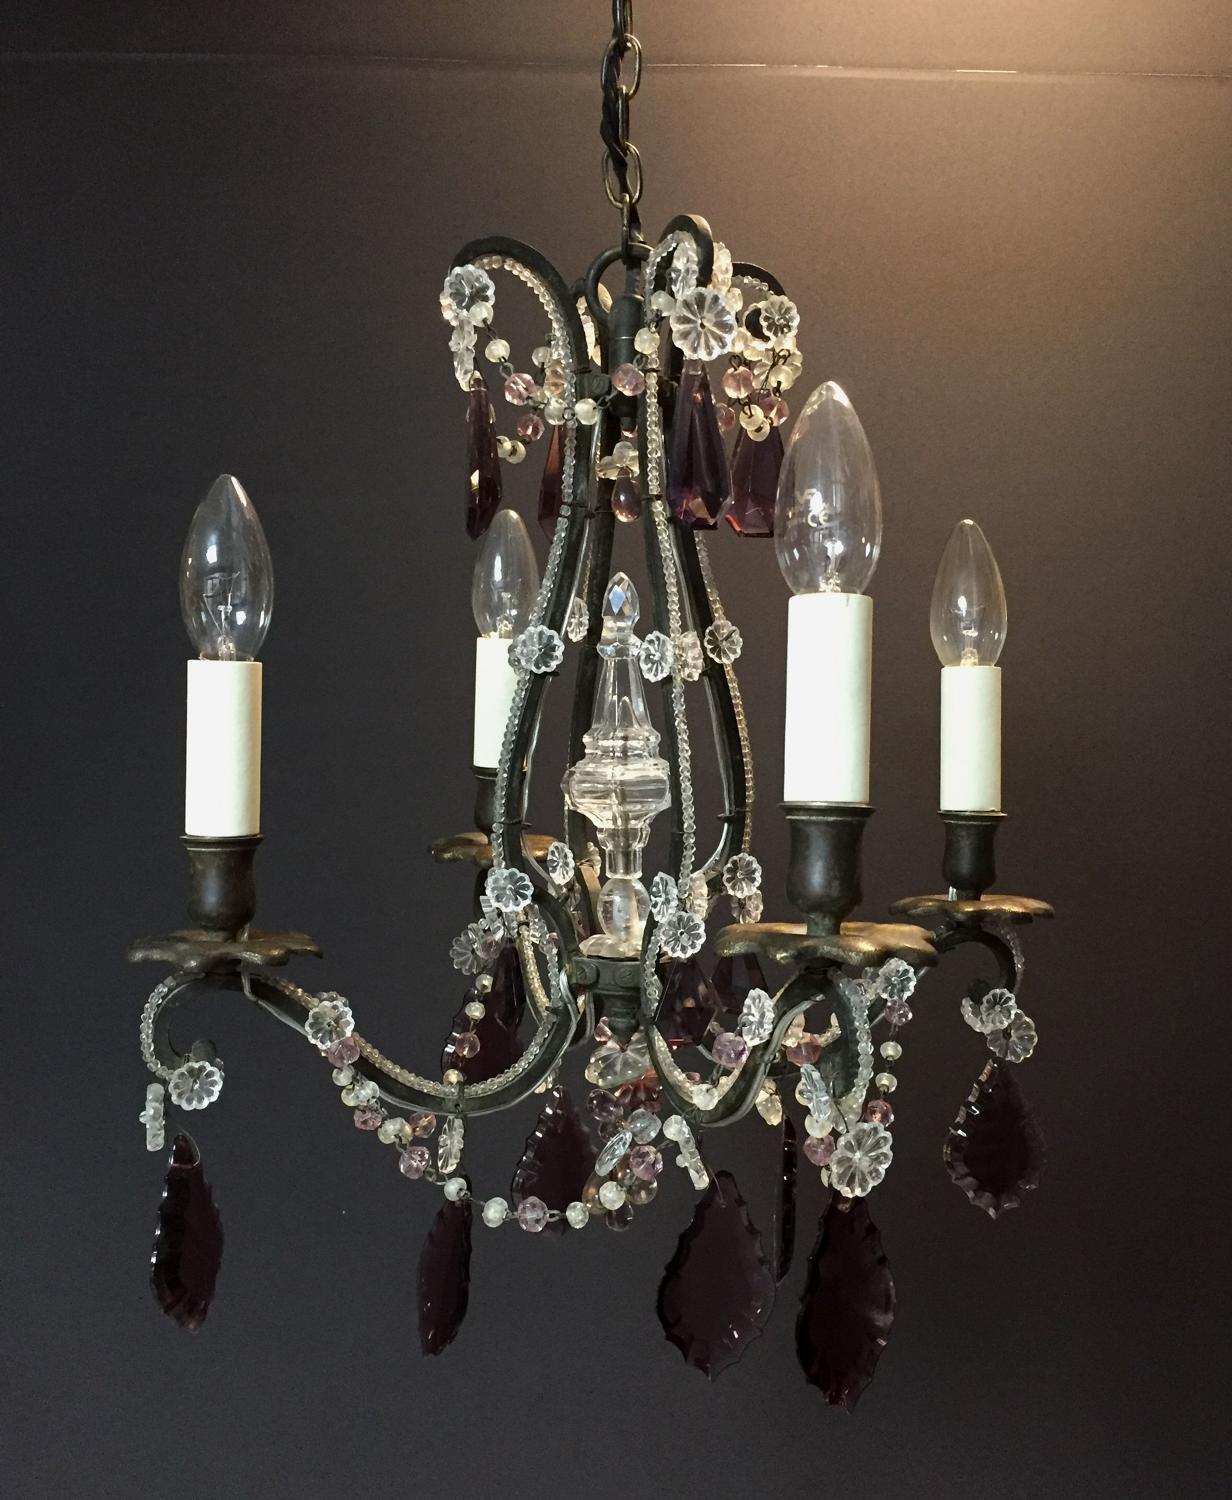 A charming black metal and amethyst chandelier